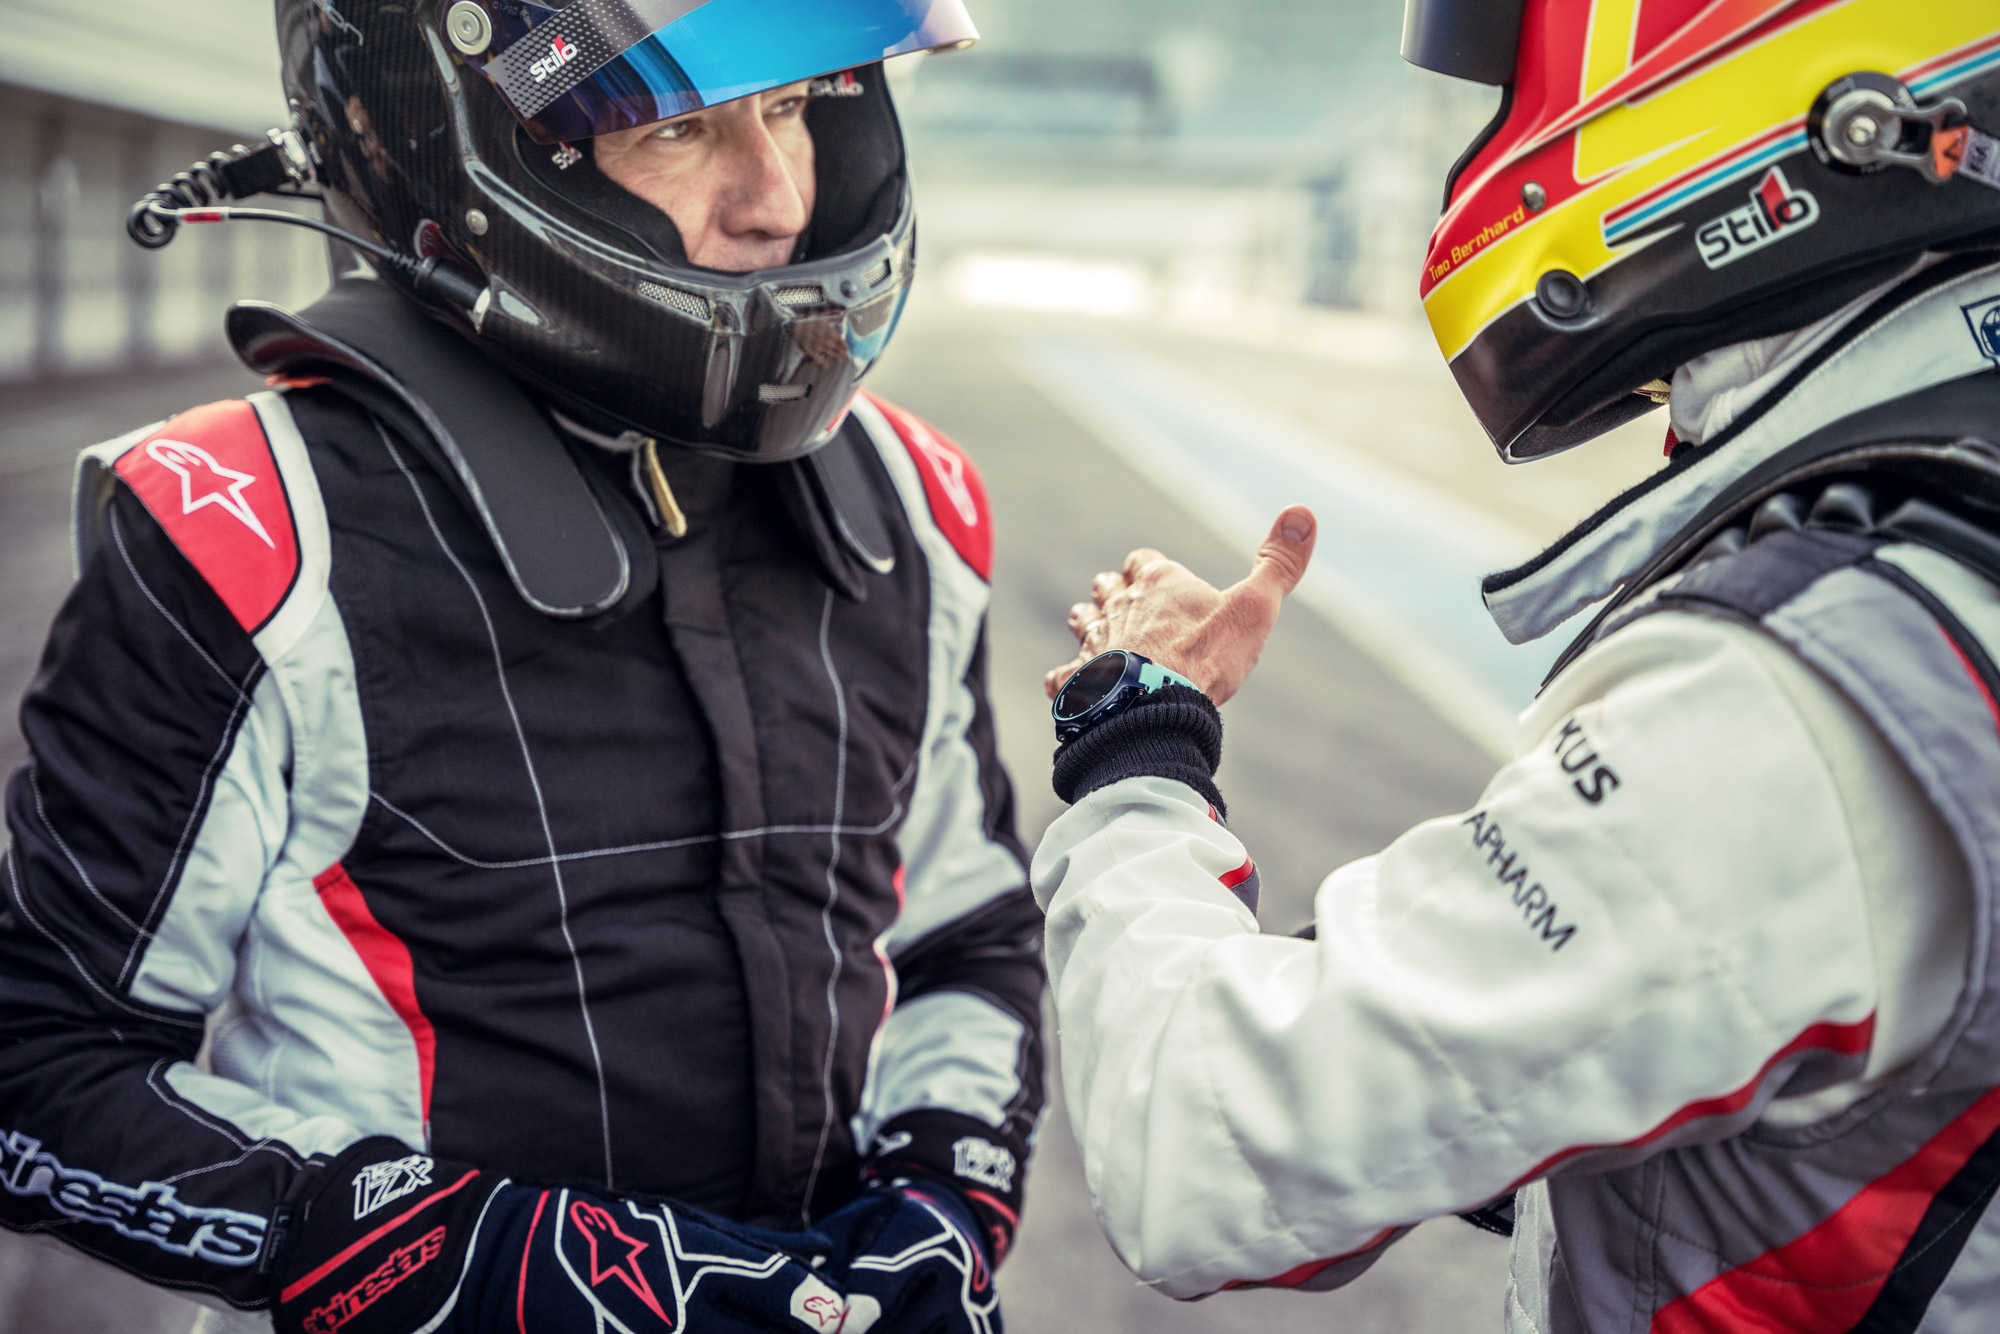 Two race drivers in helmets chatting